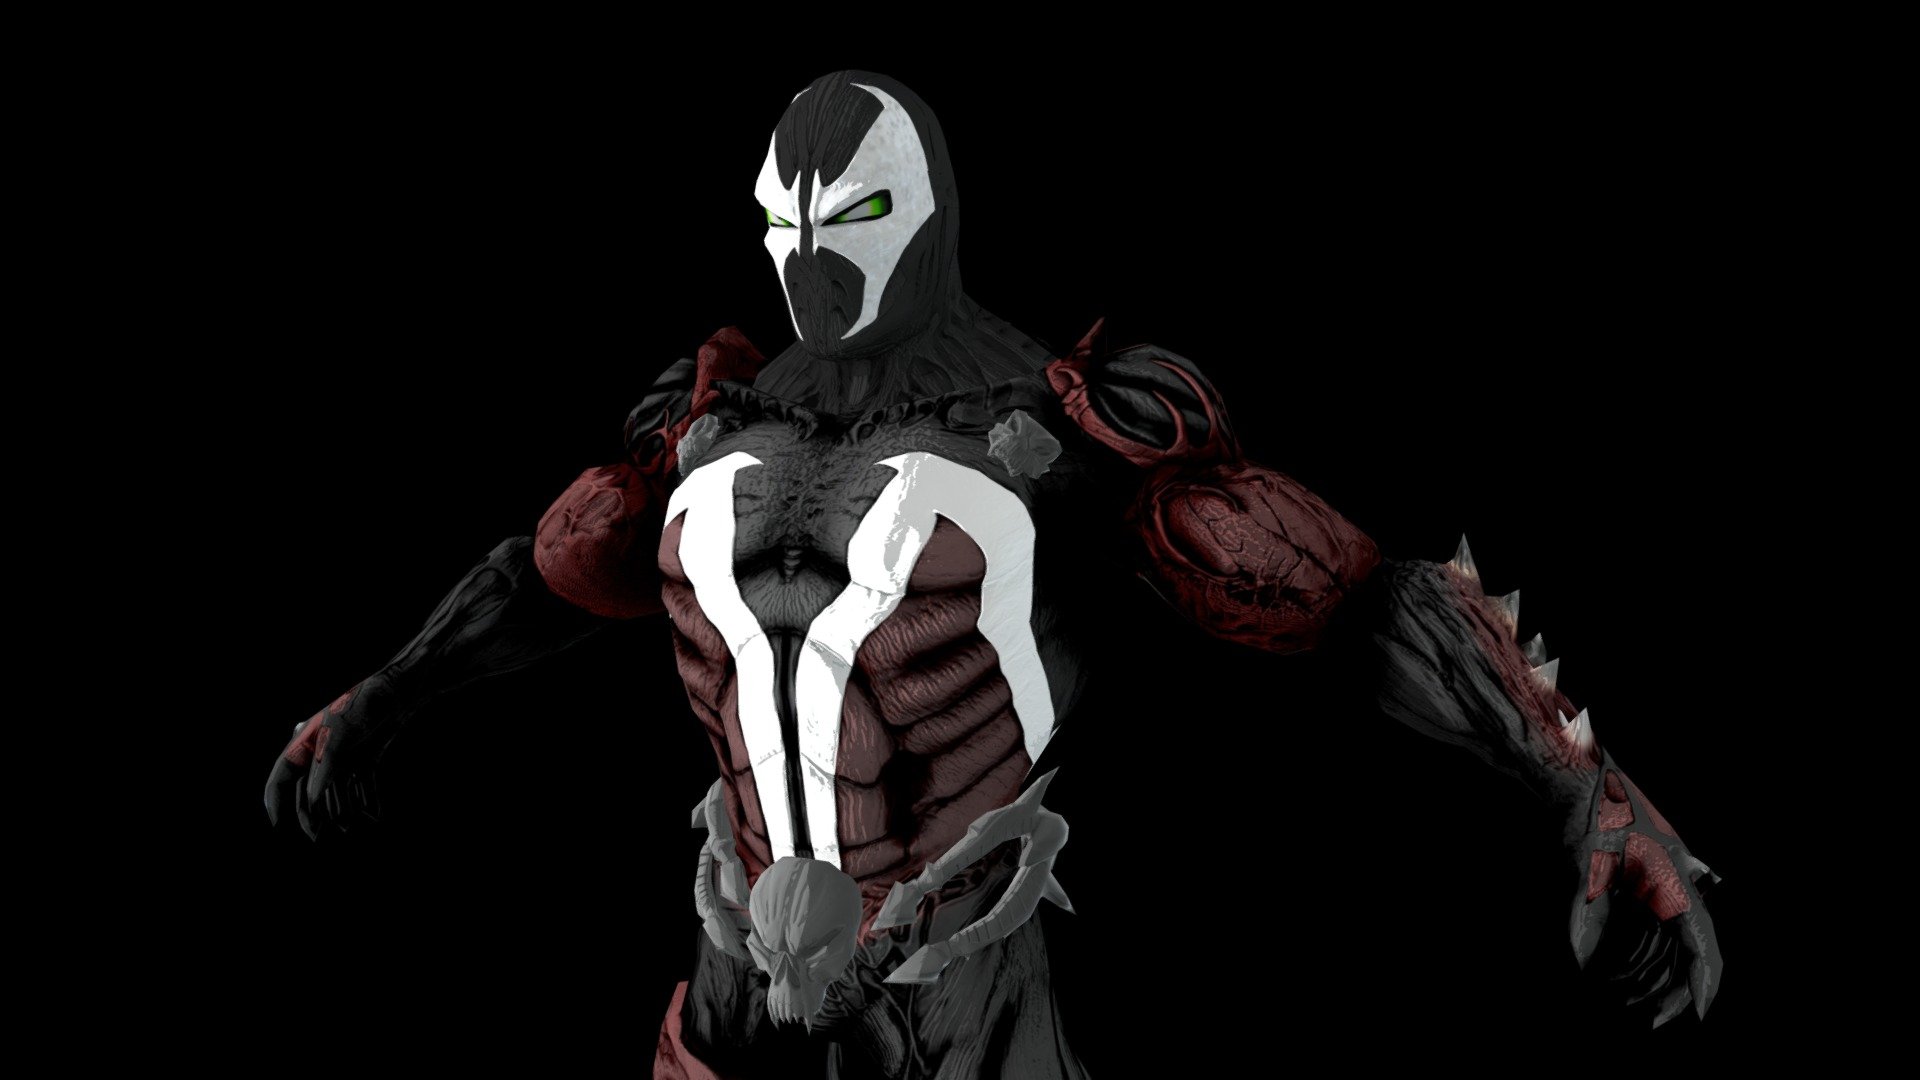 an exact copy of the costume from the 1994 film of the same name called spawn
total 18 textures in hd quality
low-polygonal model
with intersecting uvs flat patterns - spawn 1994 - 3D model by finiks 3d model